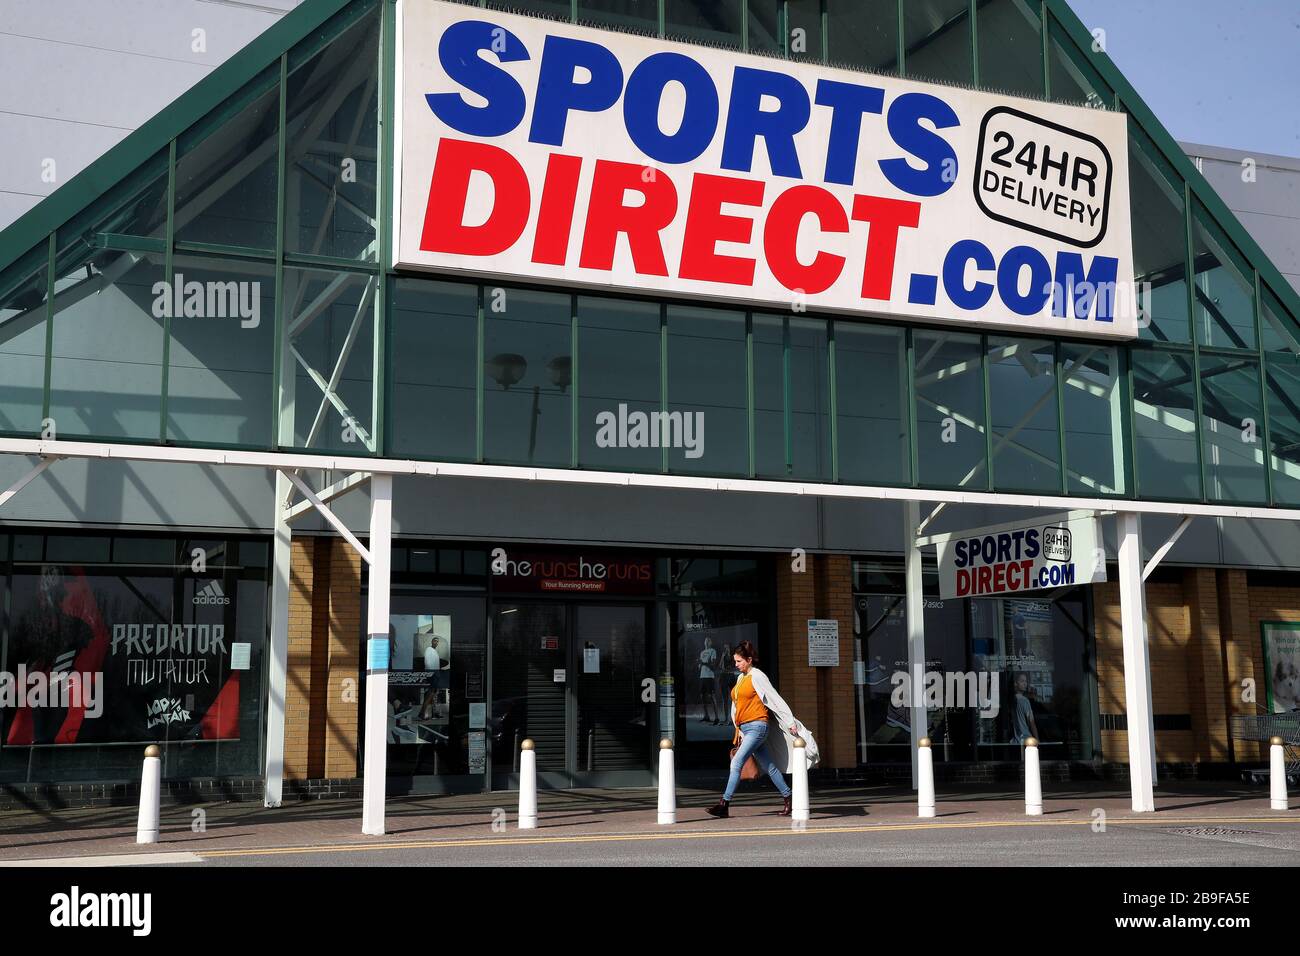 A view of a closed Sports Direct store at Wrekin Retail Park in Telford, the day after Prime Minister Boris Johnson put the UK in lockdown to help curb the spread of the coronavirus. Sports Direct has said it will close its stores in a major U-turn after initially calling for its workers to continue selling sports and fitness equipment in the face of coronavirus. Stock Photo